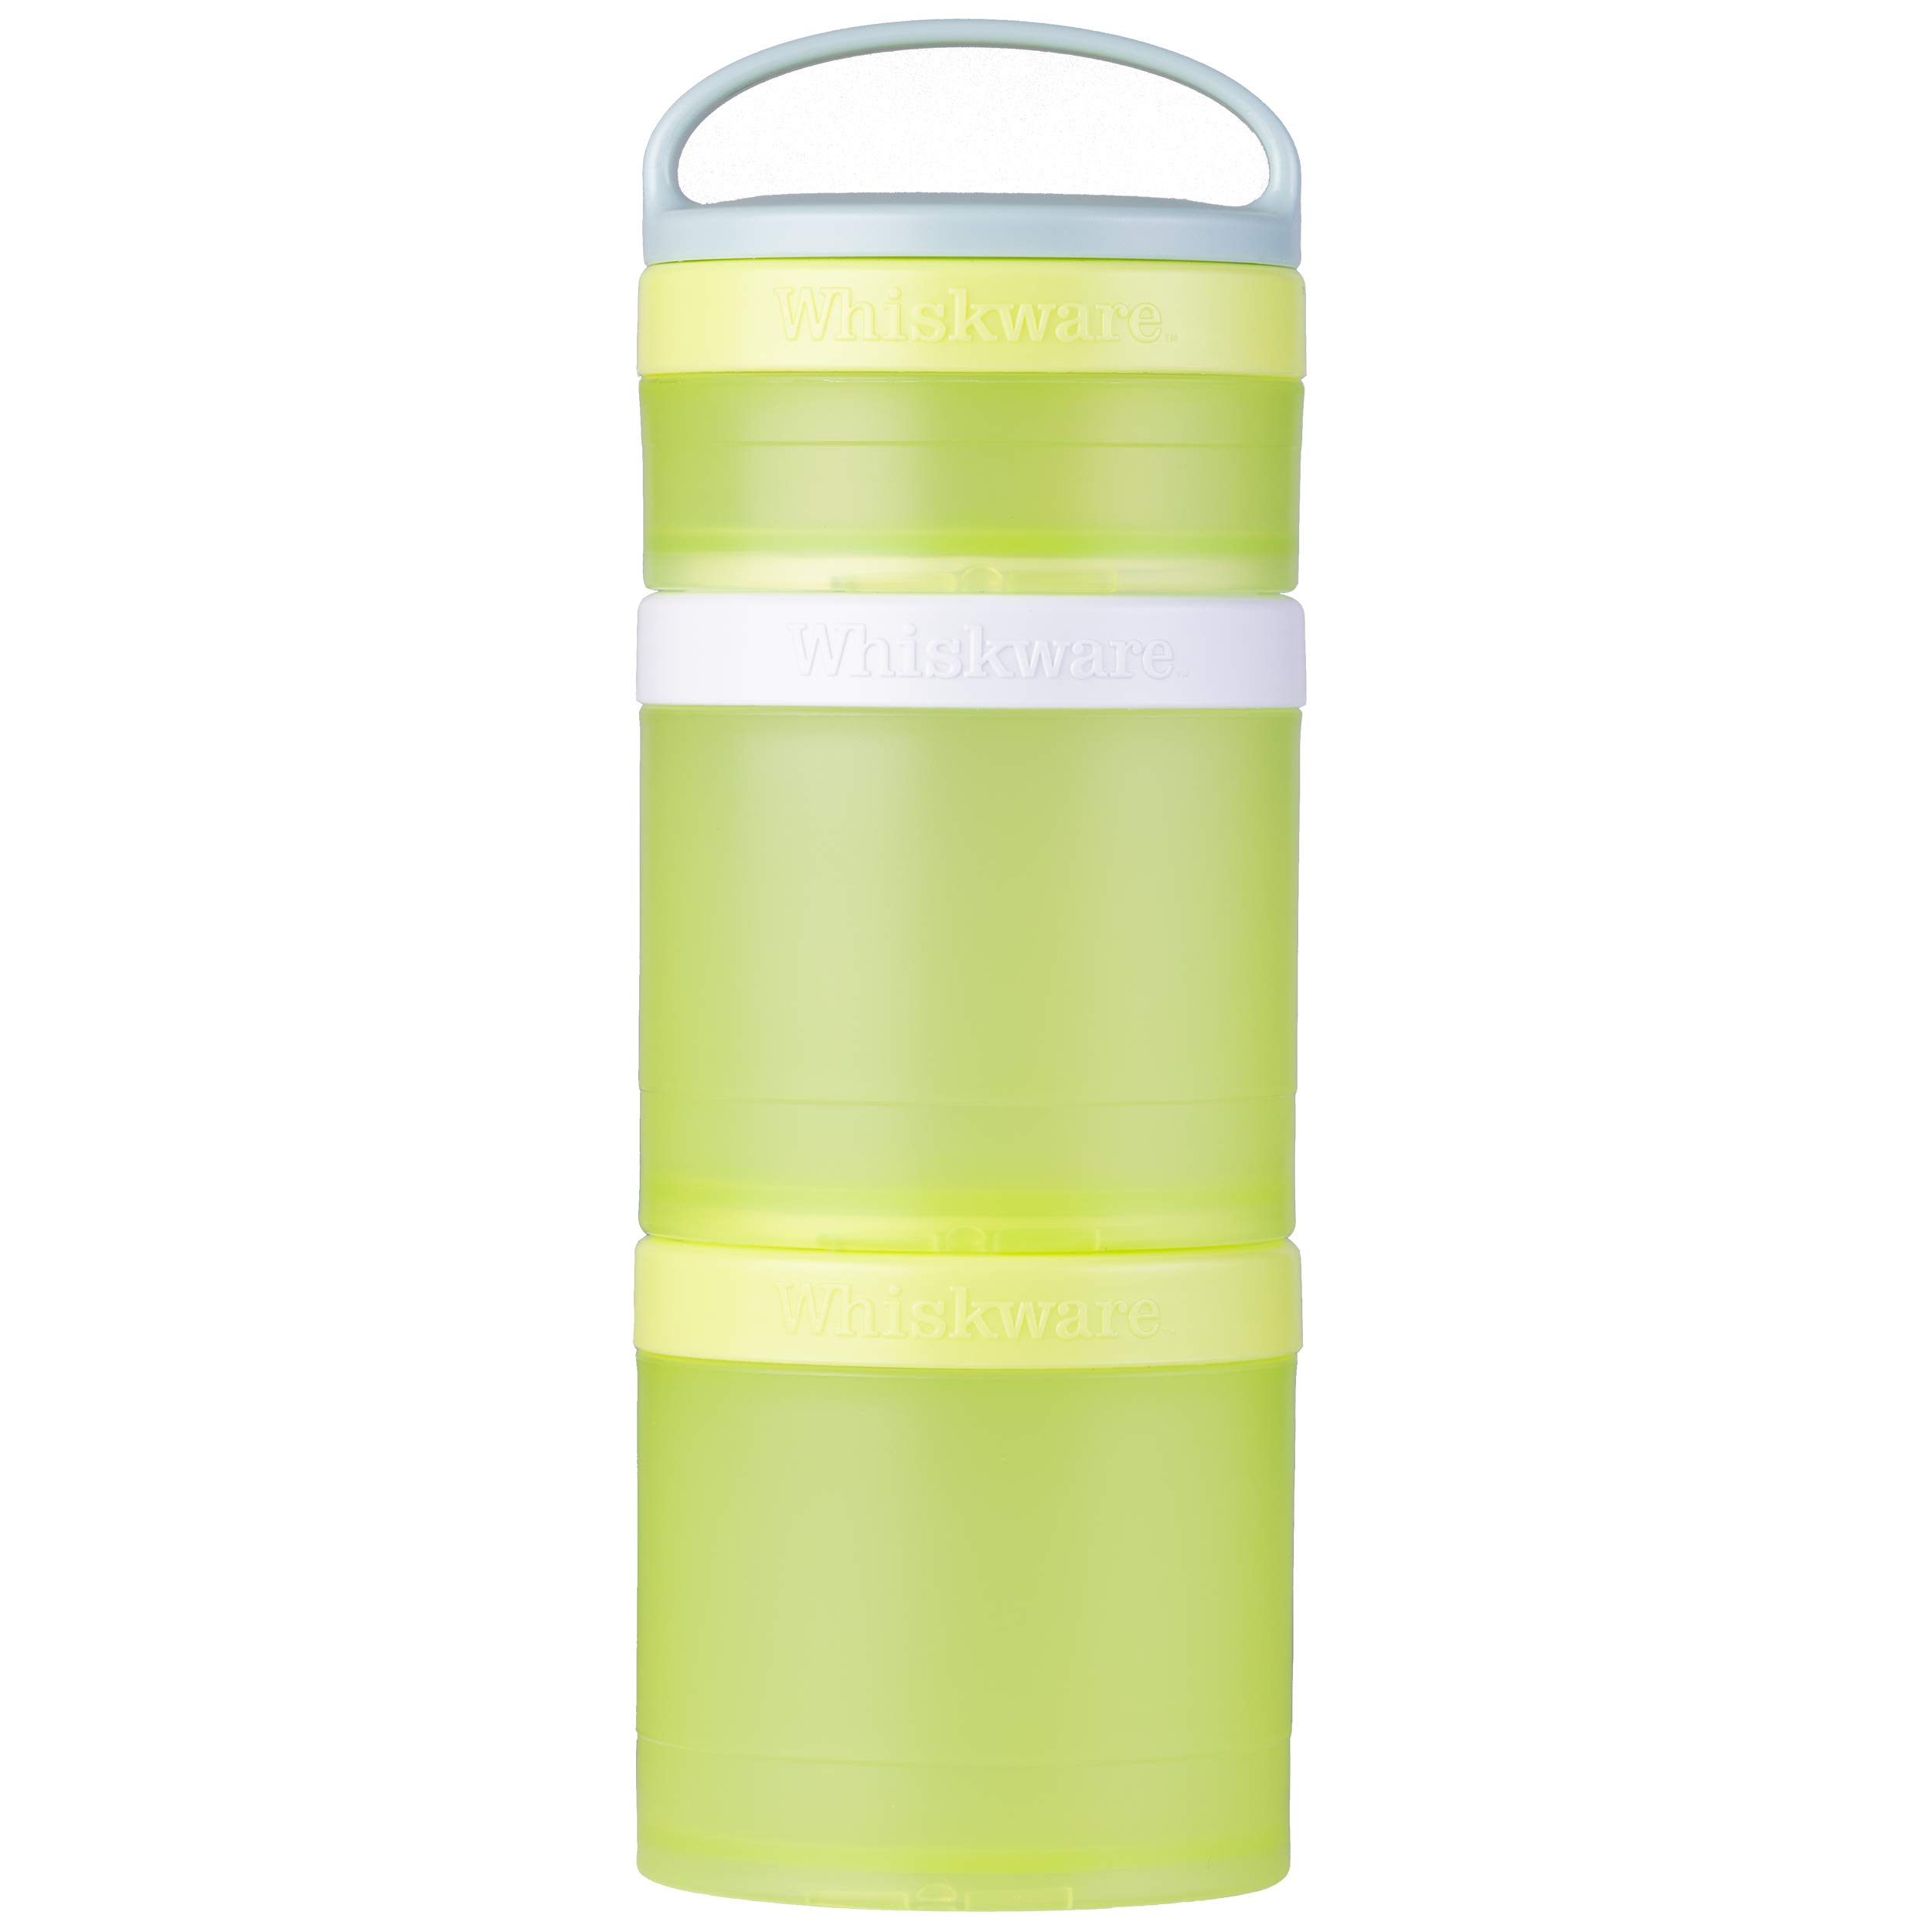 Whiskware Stackable Snack Containers for Kids and Toddlers, 3 Stackable Snack Cups for School and Travel, Neon Yellow